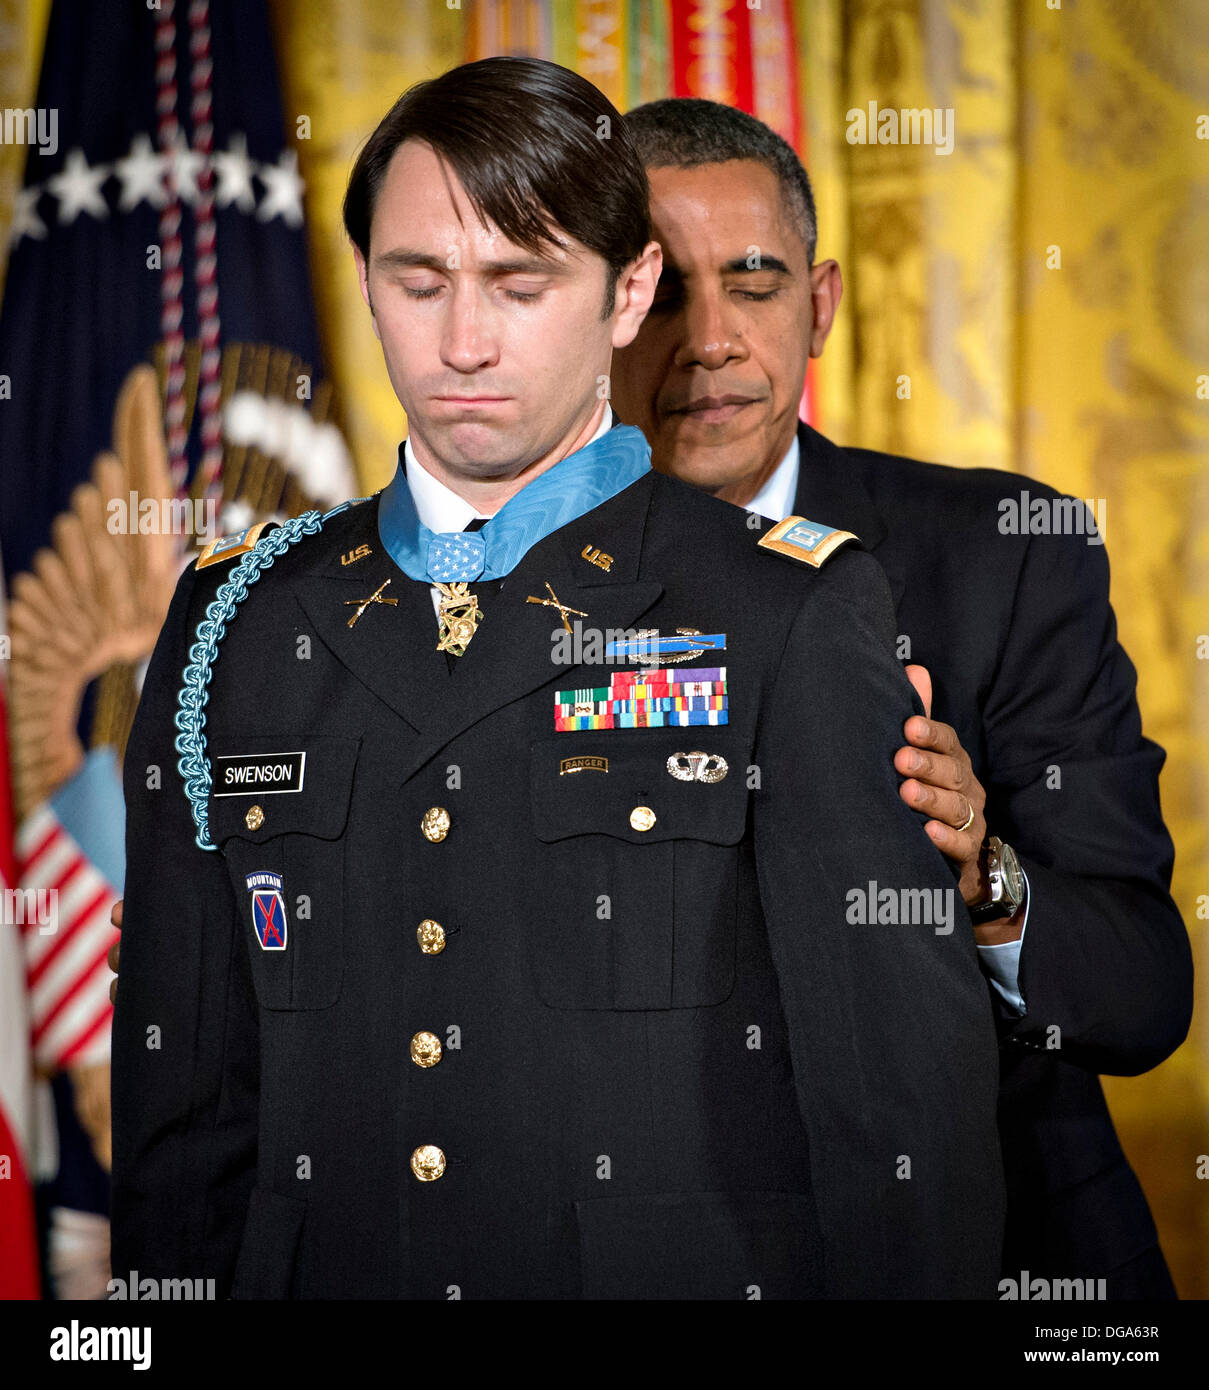 US President Barack Obama presents the Medal of Honor to former Army Capt. William D. Swenson during a ceremony in the East Room of the White House October 15, 2013 in Washington, DC. The Medal of Honor is the nation's highest military honor. Stock Photo